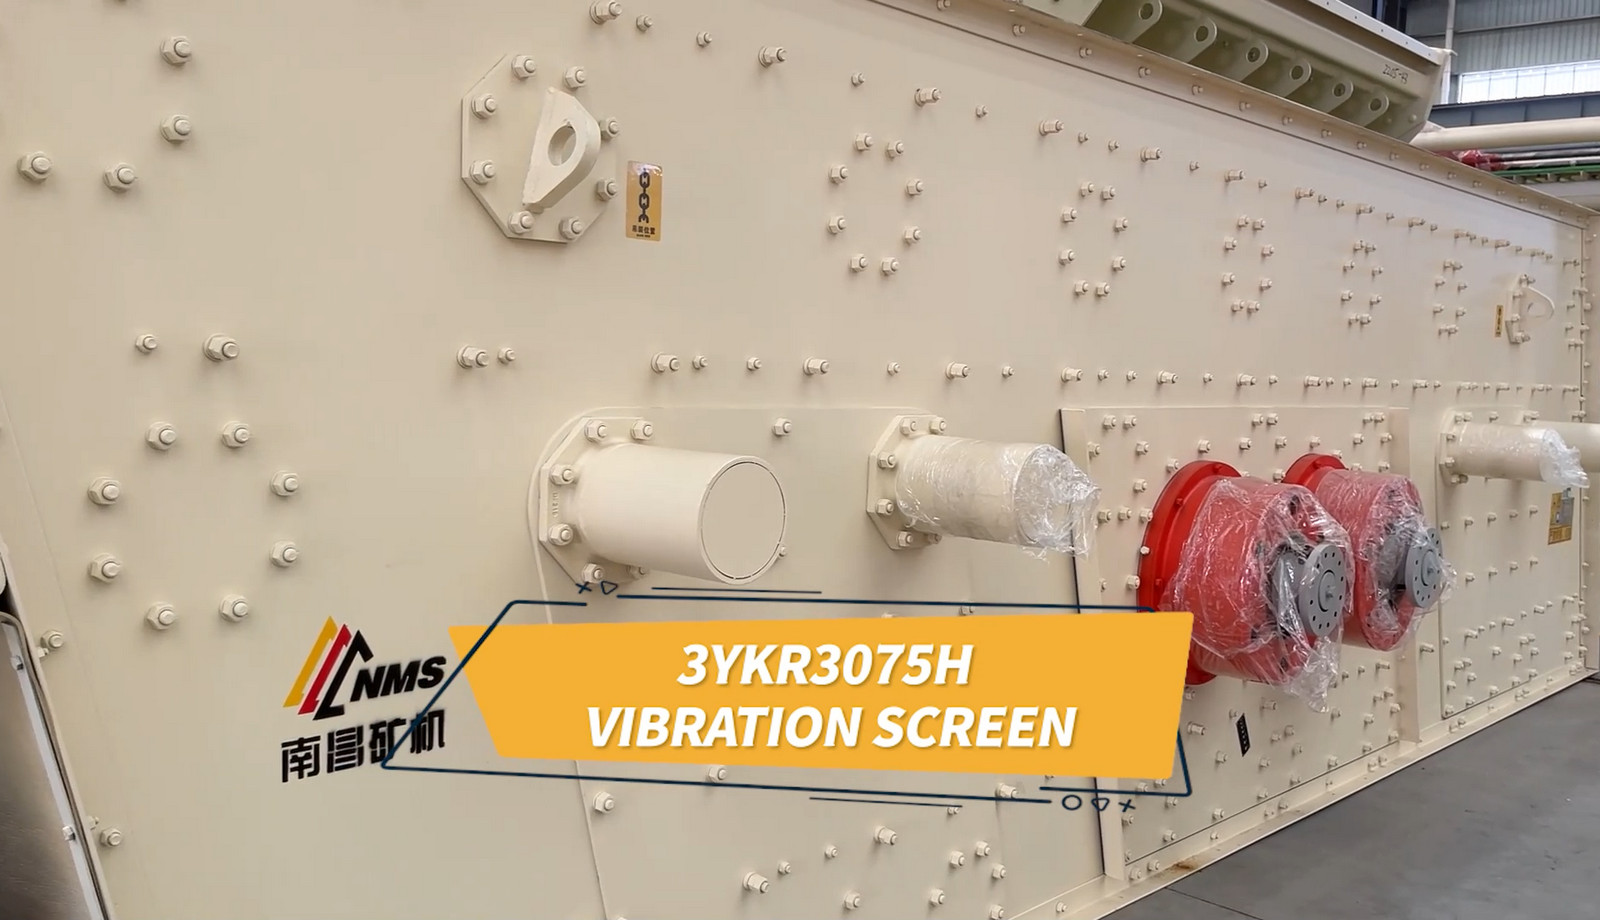 Introduction of 3YKR3075H Vibration Screen